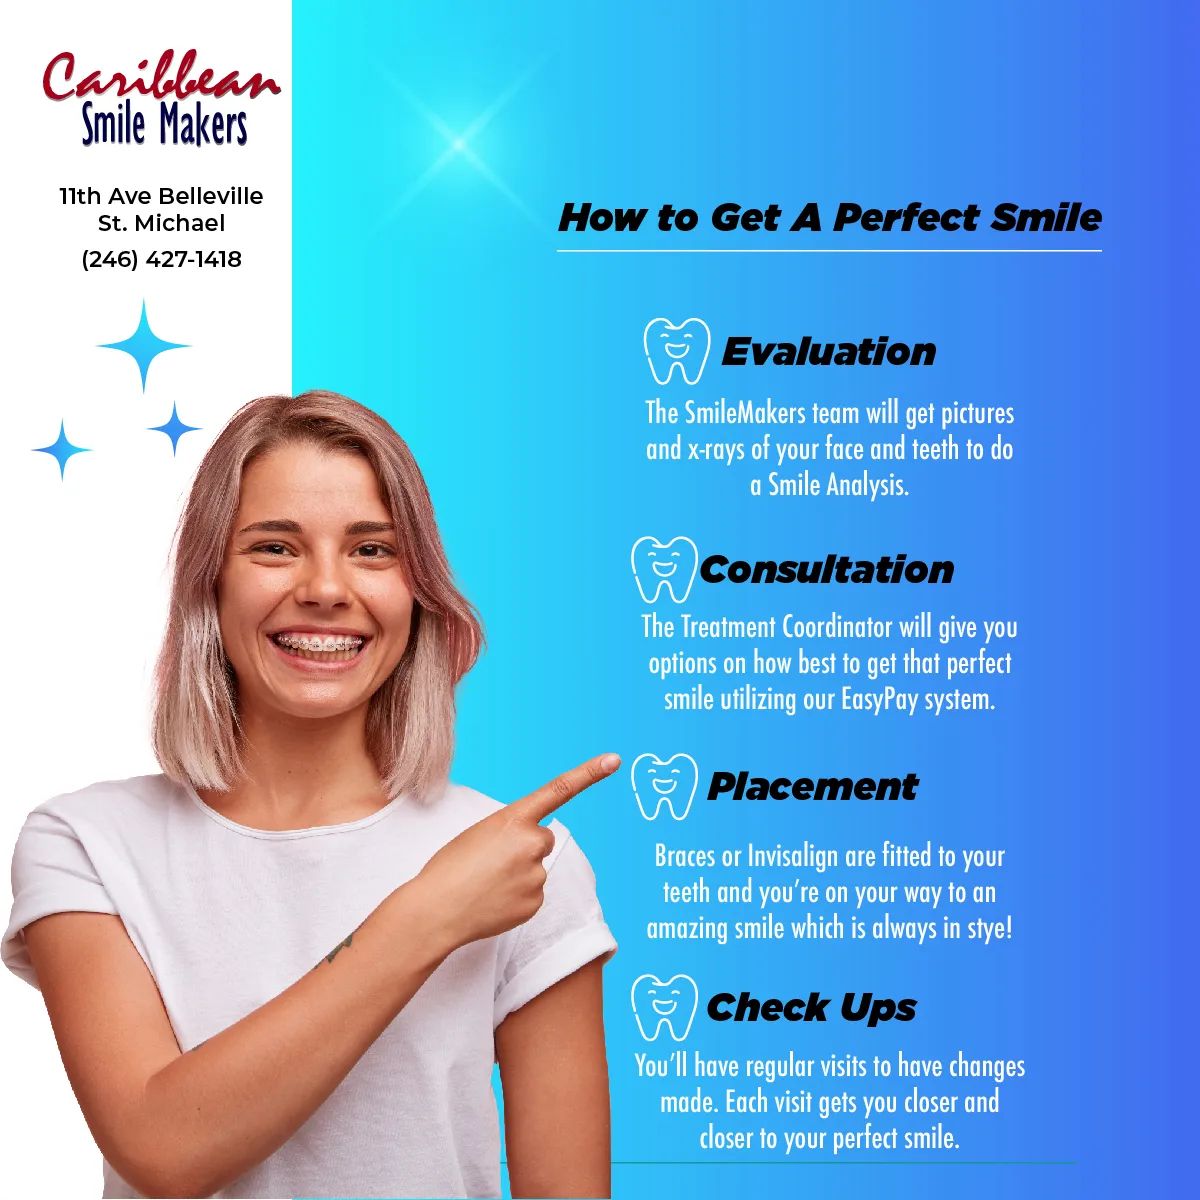 Caribbean Smile Makers - Dentists-Cosmetic